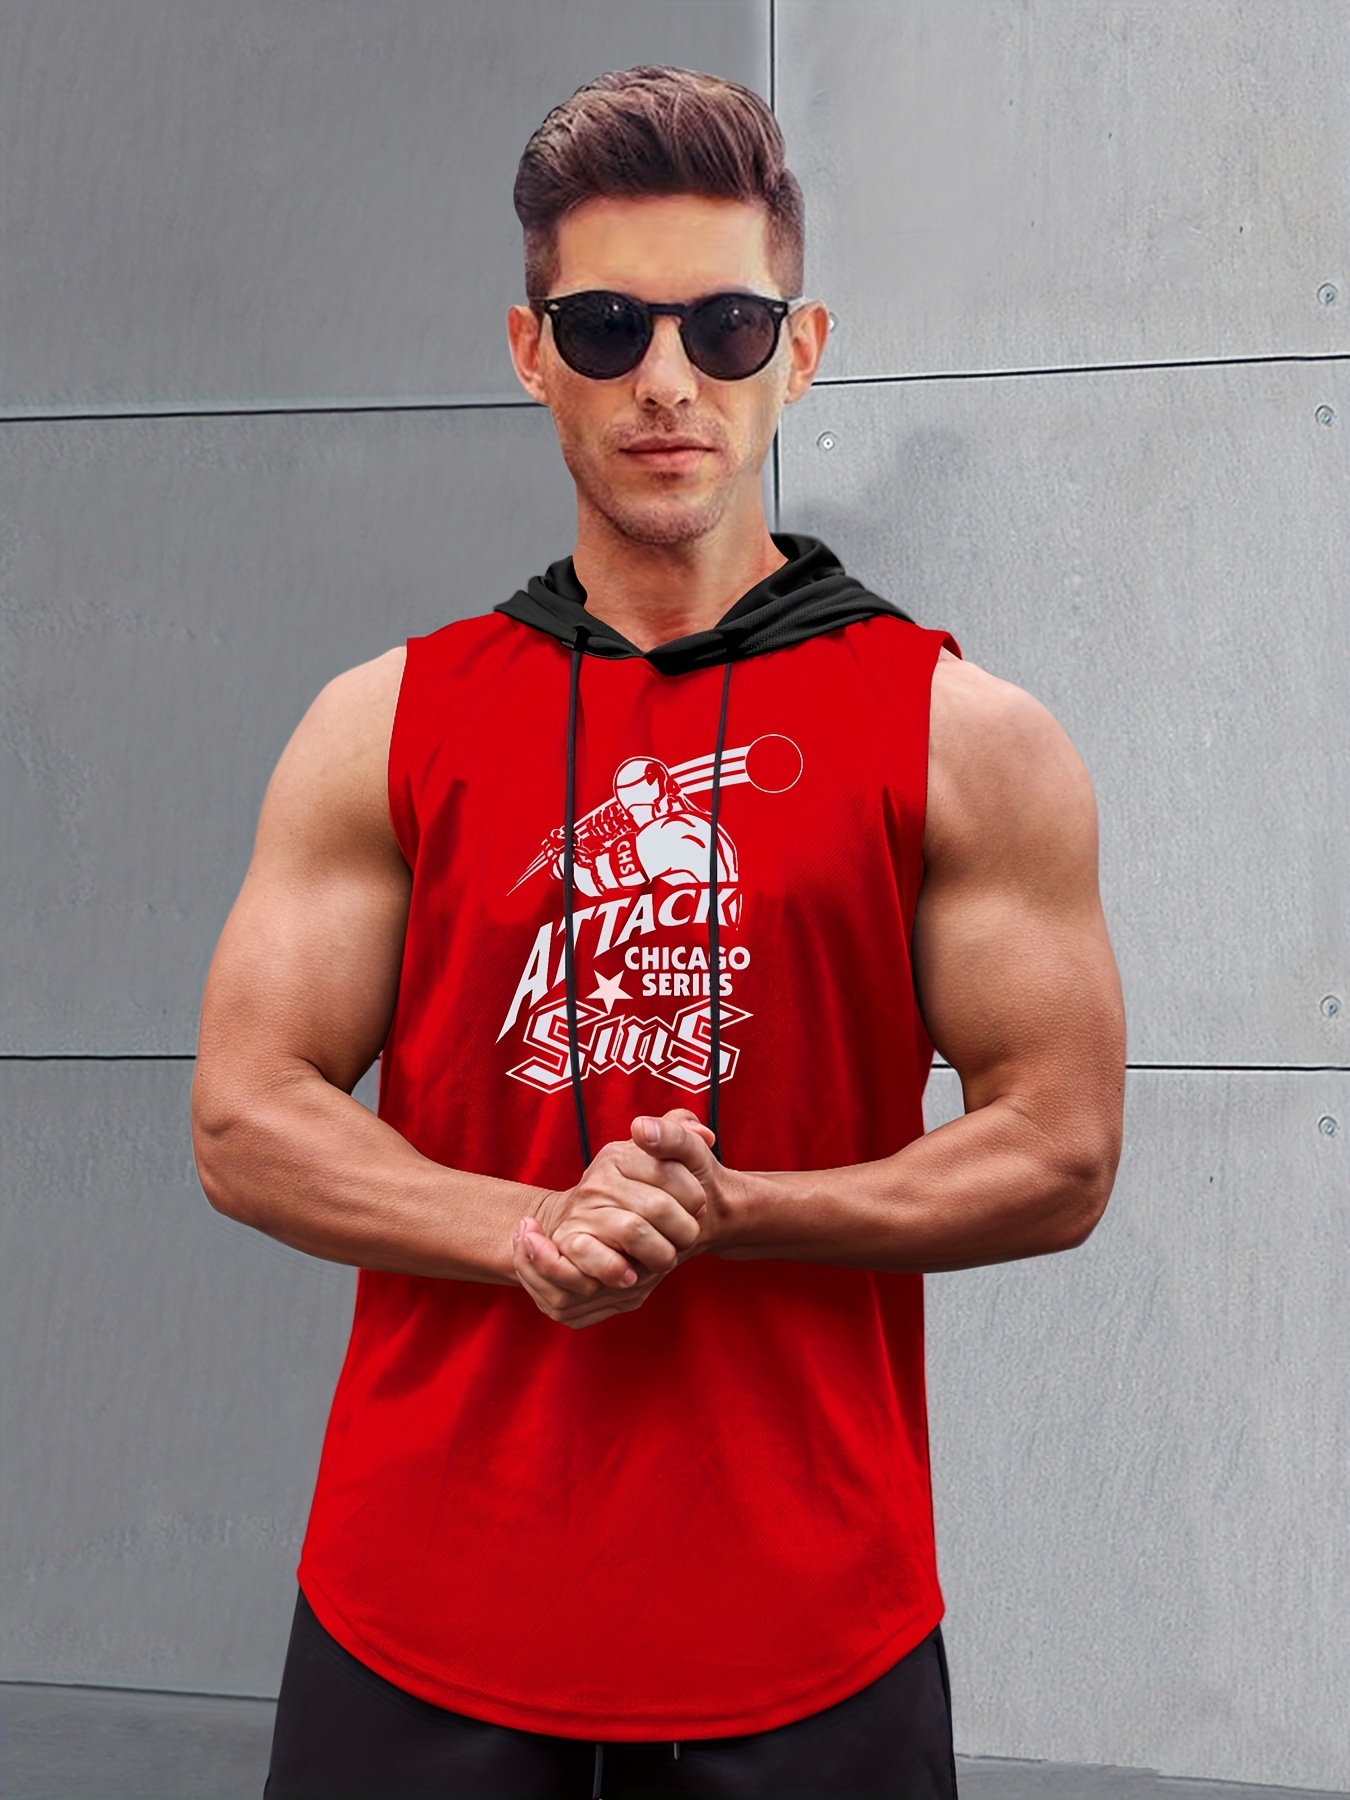 GYM Print, Men's Graphic Design Hooded Tank Top, Casual Comfy Vest For  Summer Workout Gym Fitness Men's Clothing Top